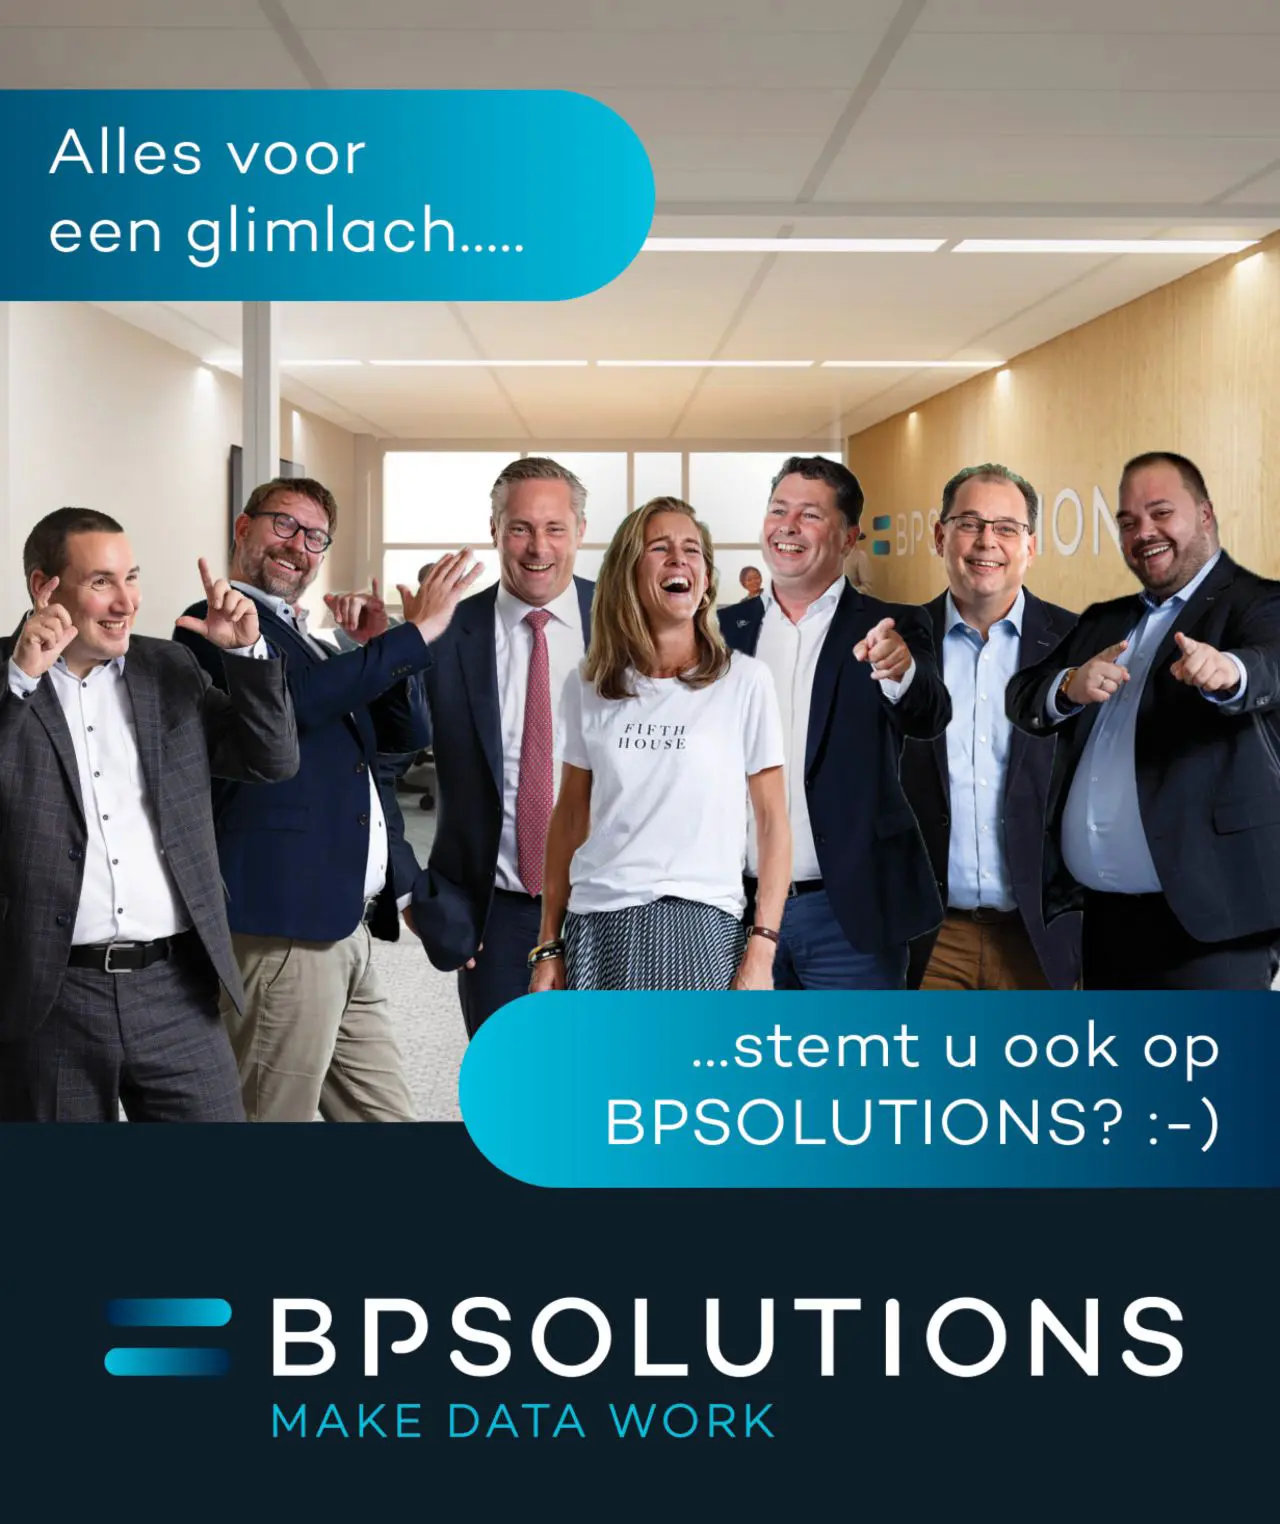 BPSOLUTIONS nominated for 2 Dutch IT Awards